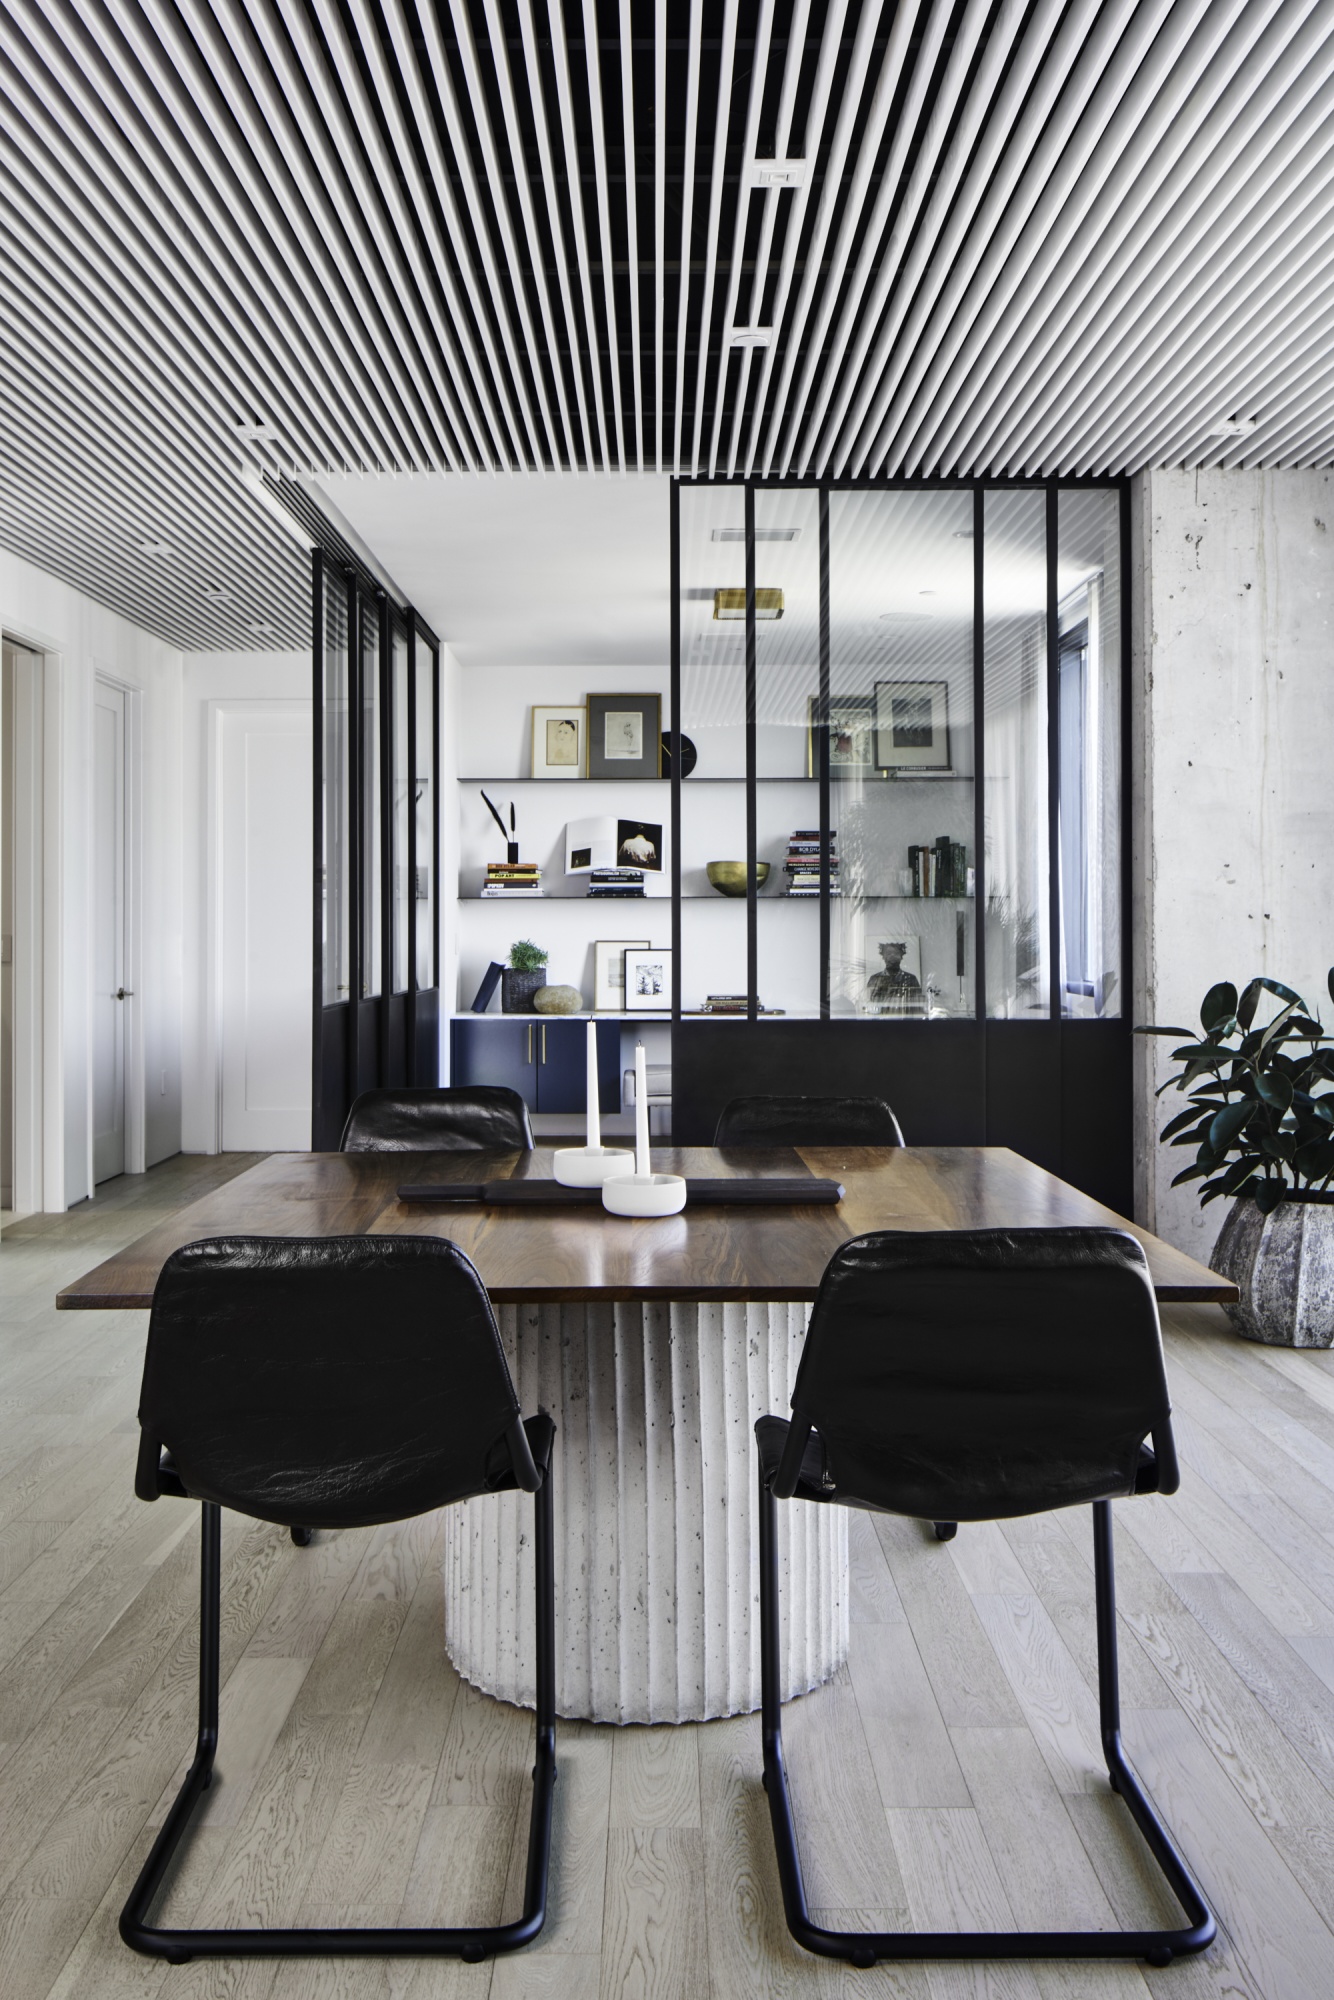 Slatted suspended ceiling creates openness throughout.